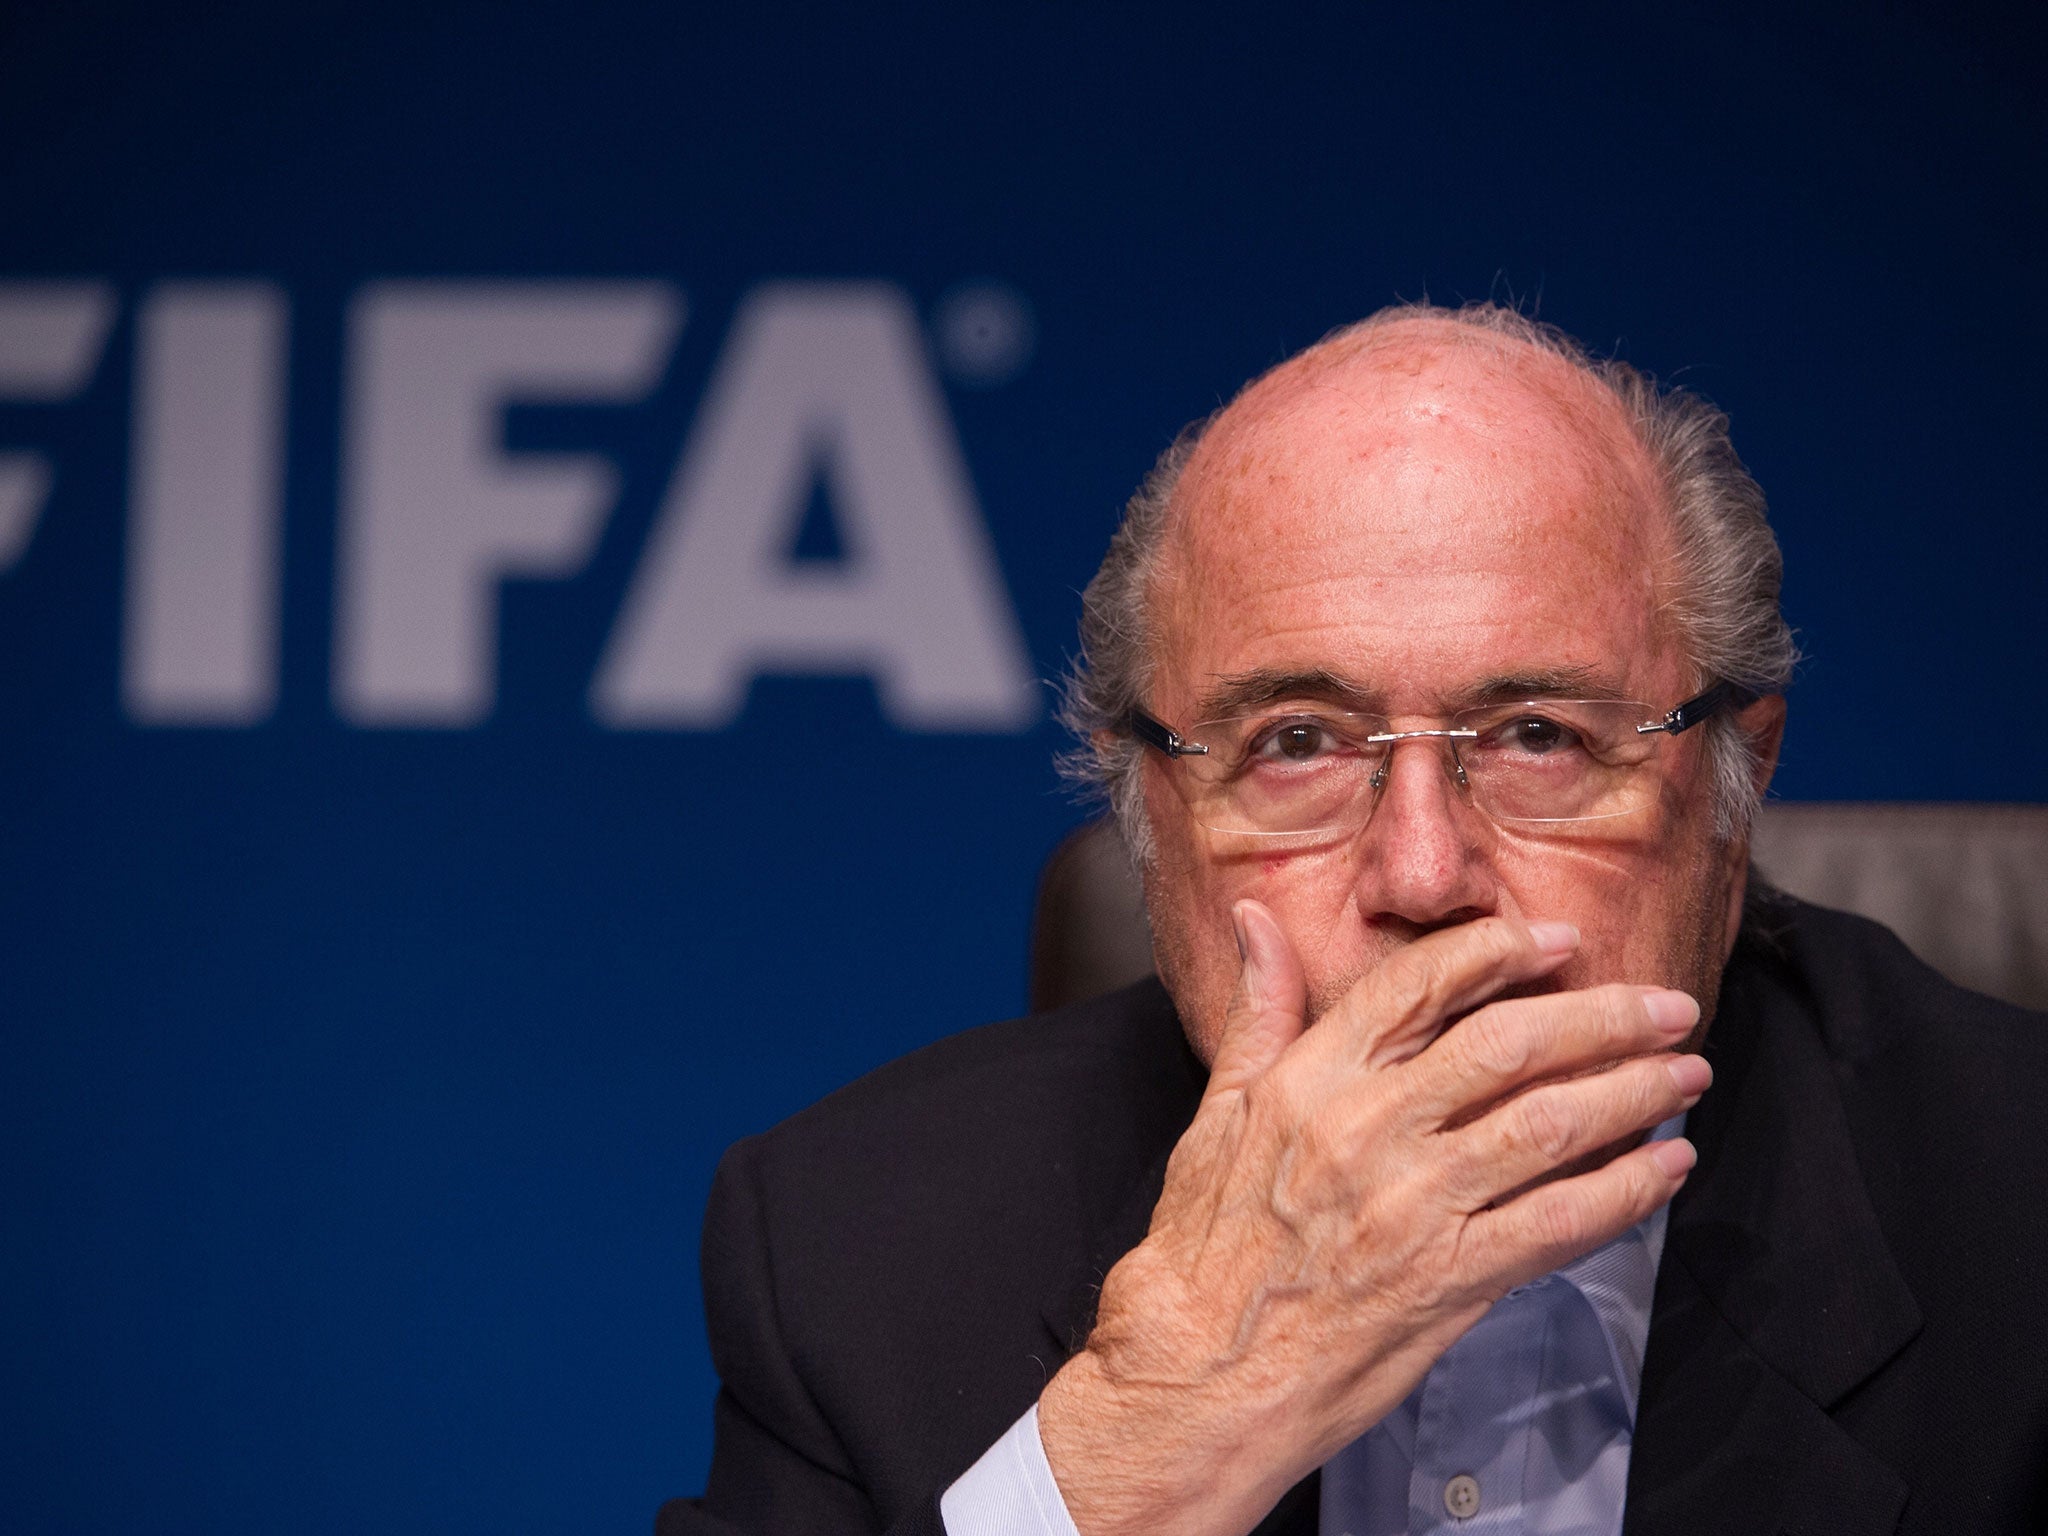 World Cup: FIFA launches criminal case over 2018 and 2022 bidding